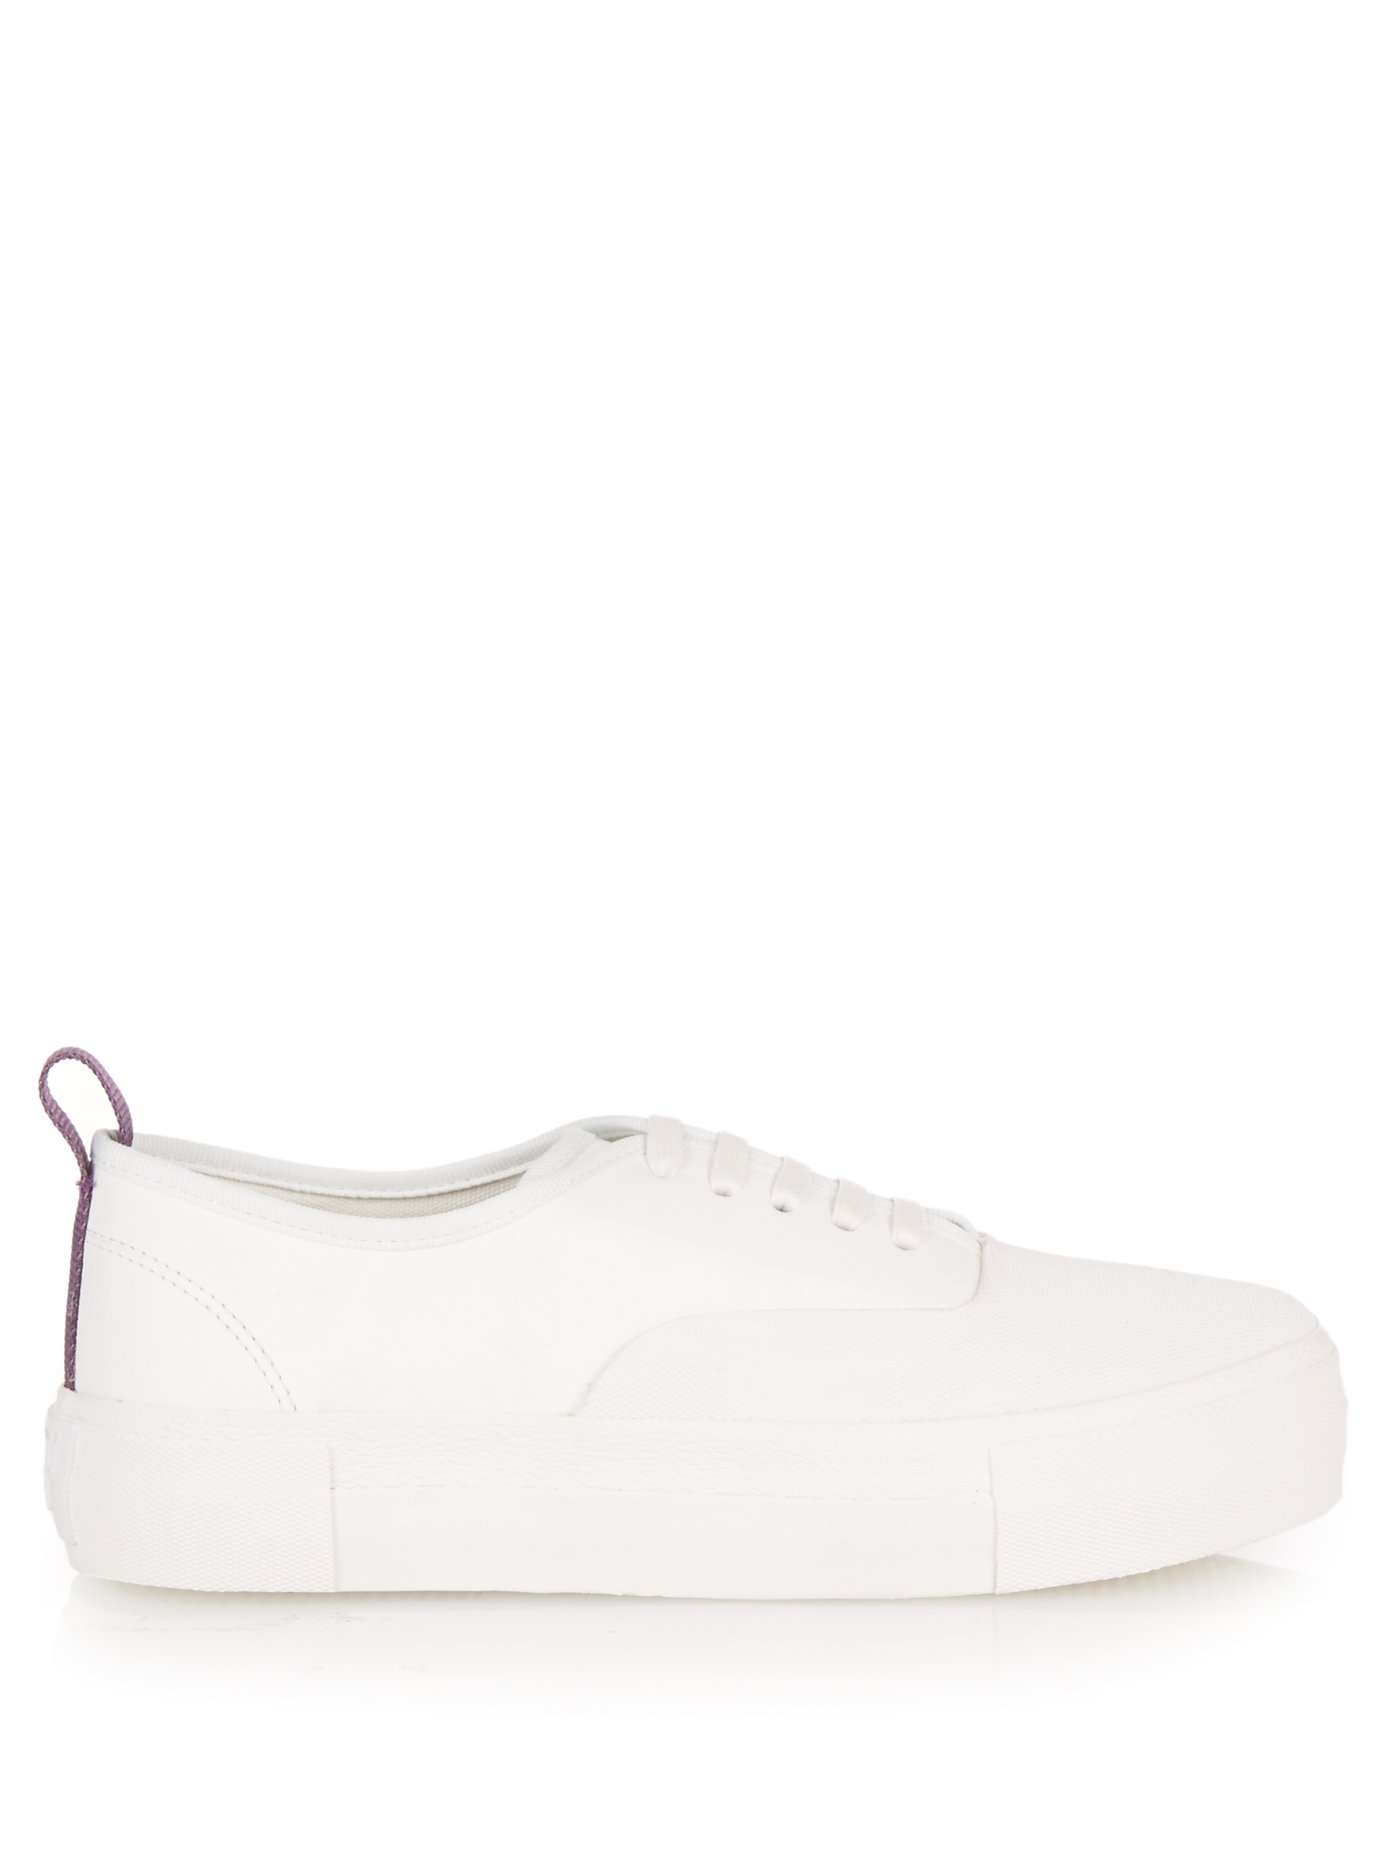 eytys mother leather white